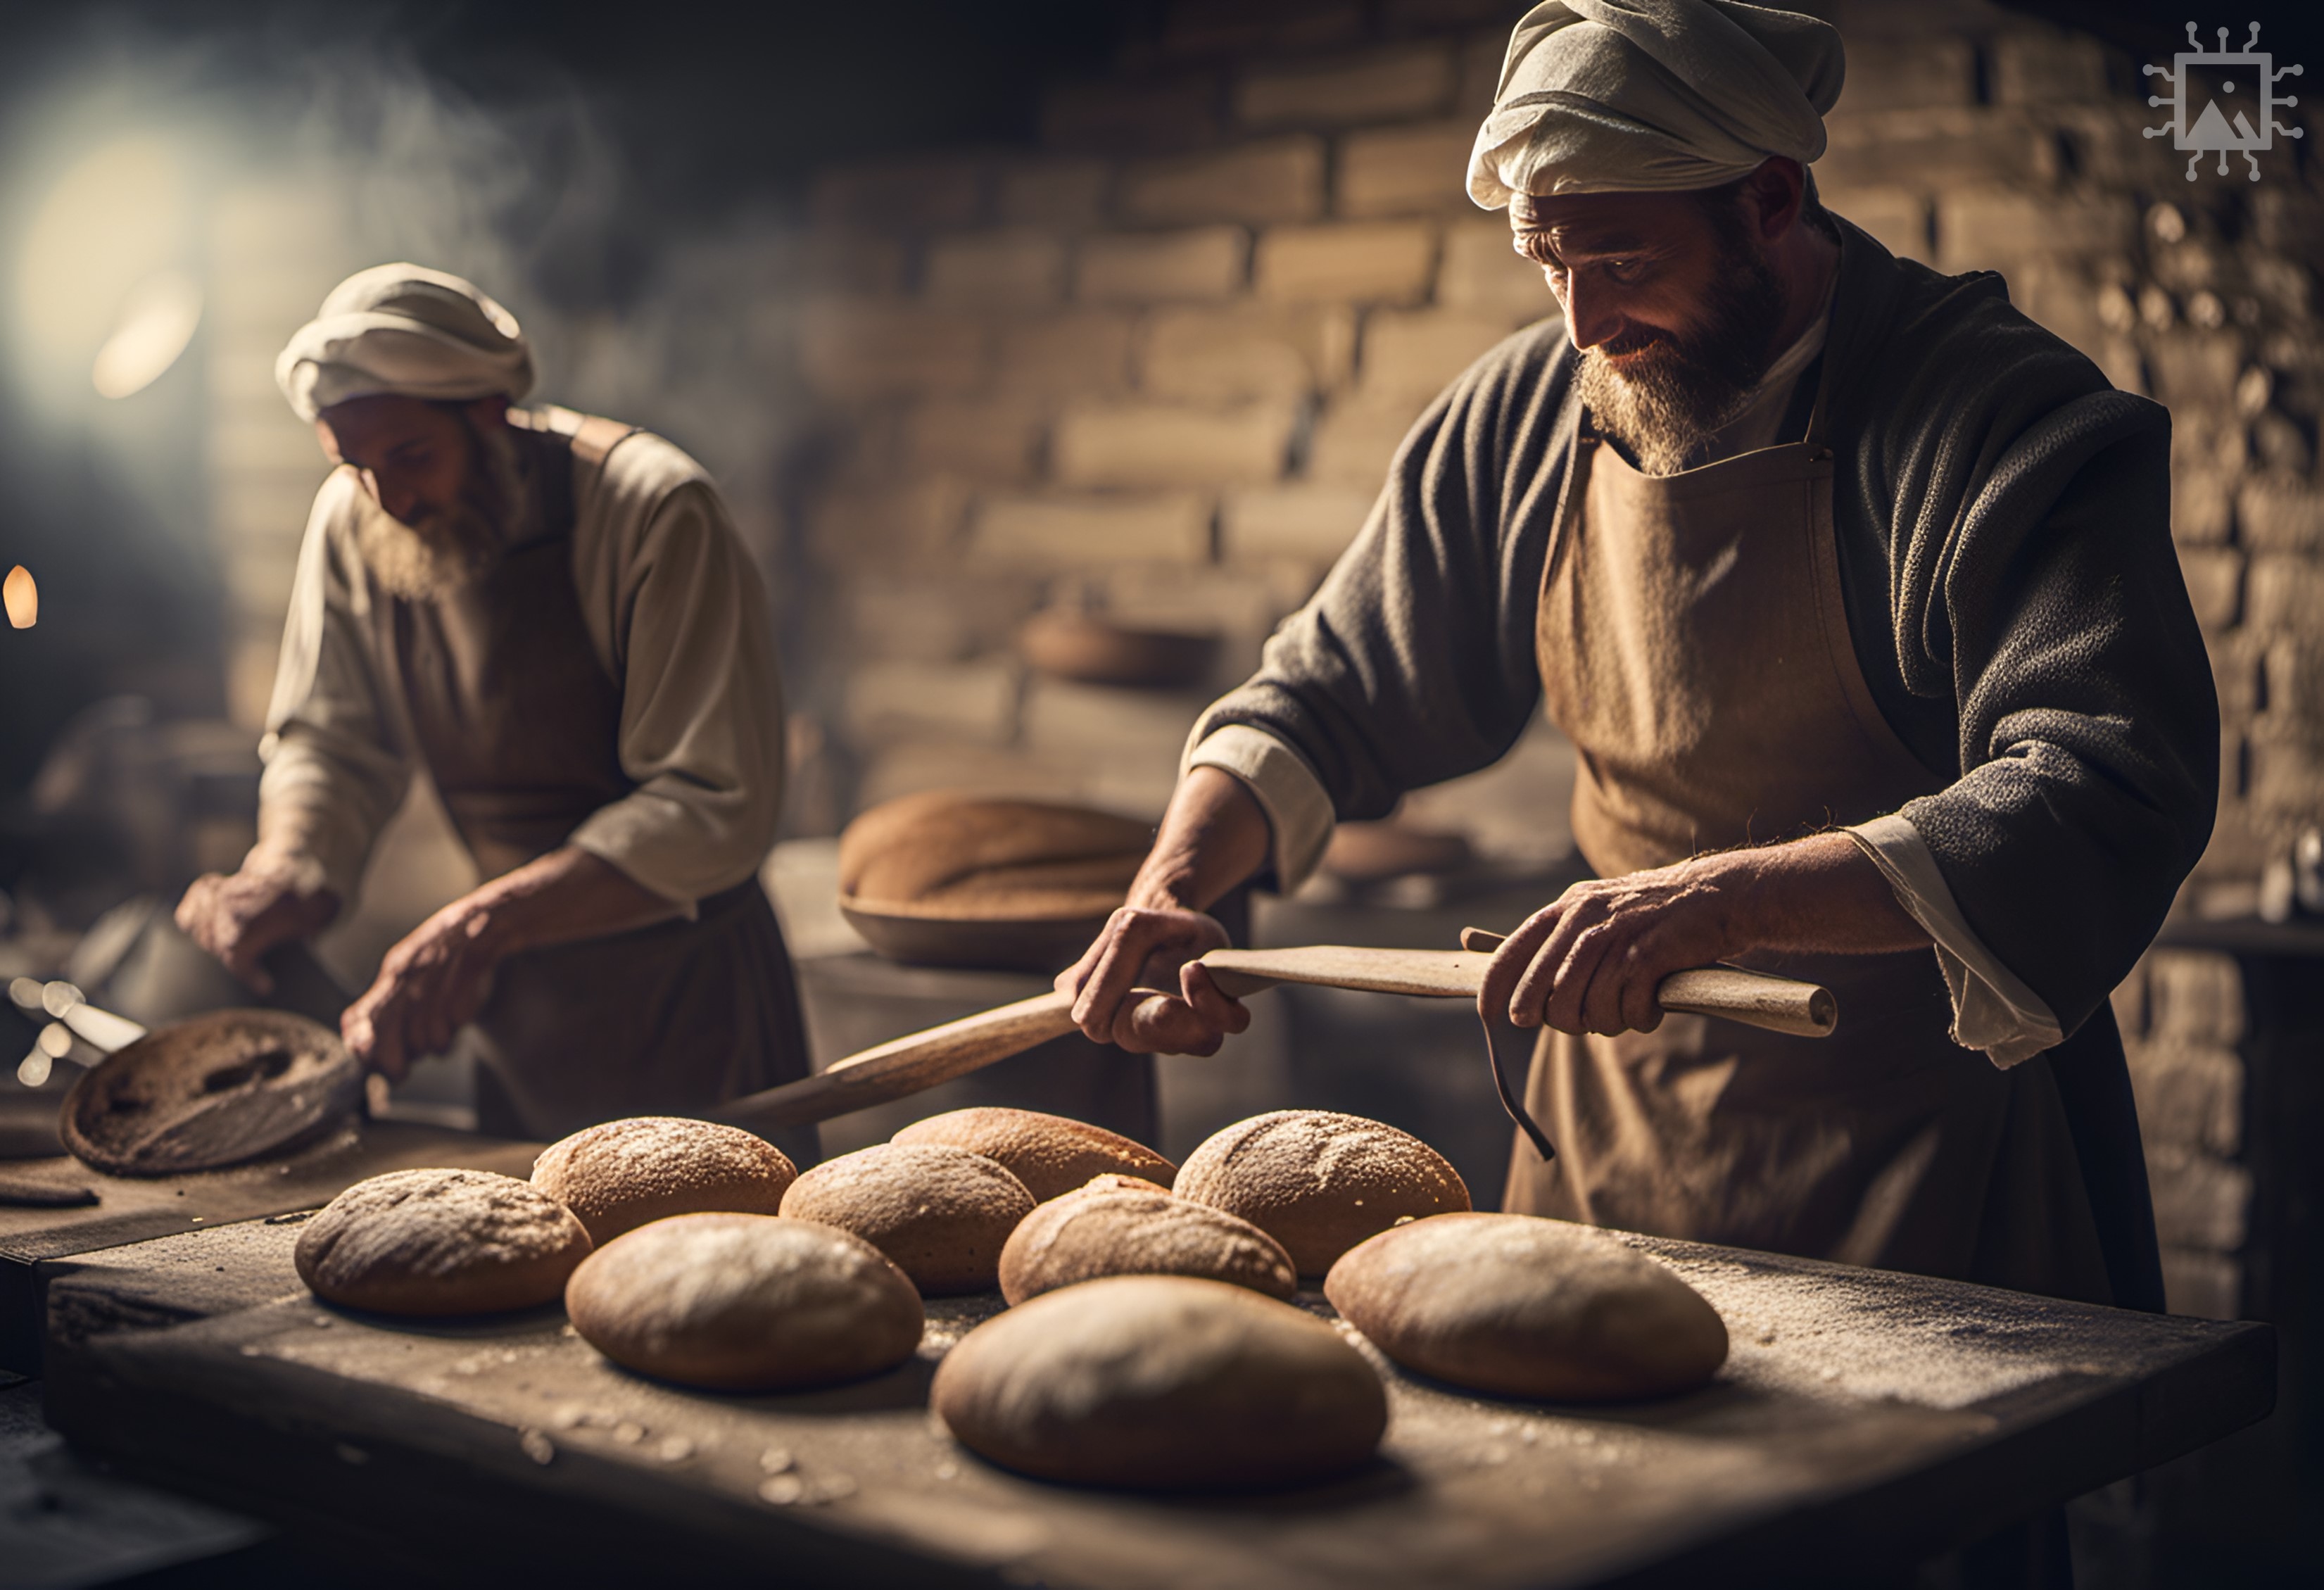 Artificial Intelligence-generated image produced using DreamStudio [accessed 03-08-2023]: ‘Medieval bakers baking bread.